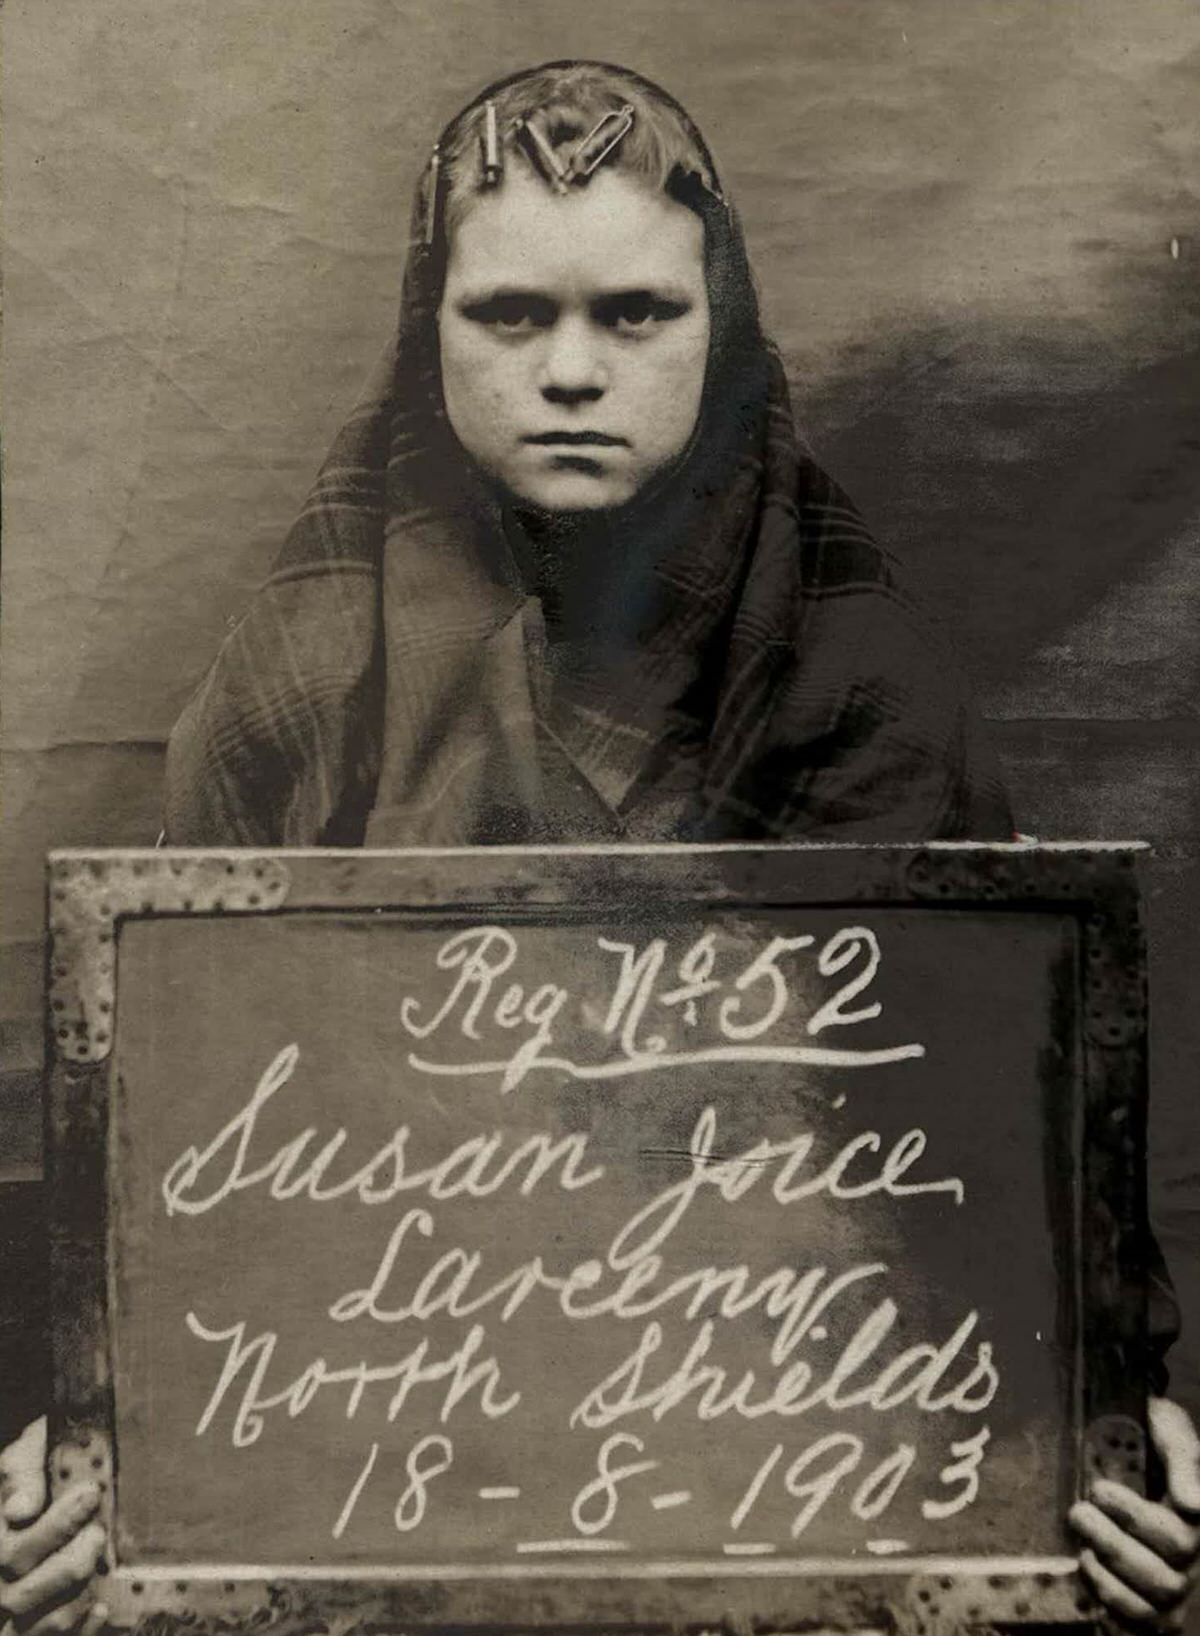 Susan Joice, 16, arrested for stealing money from a gas meter, 1903.